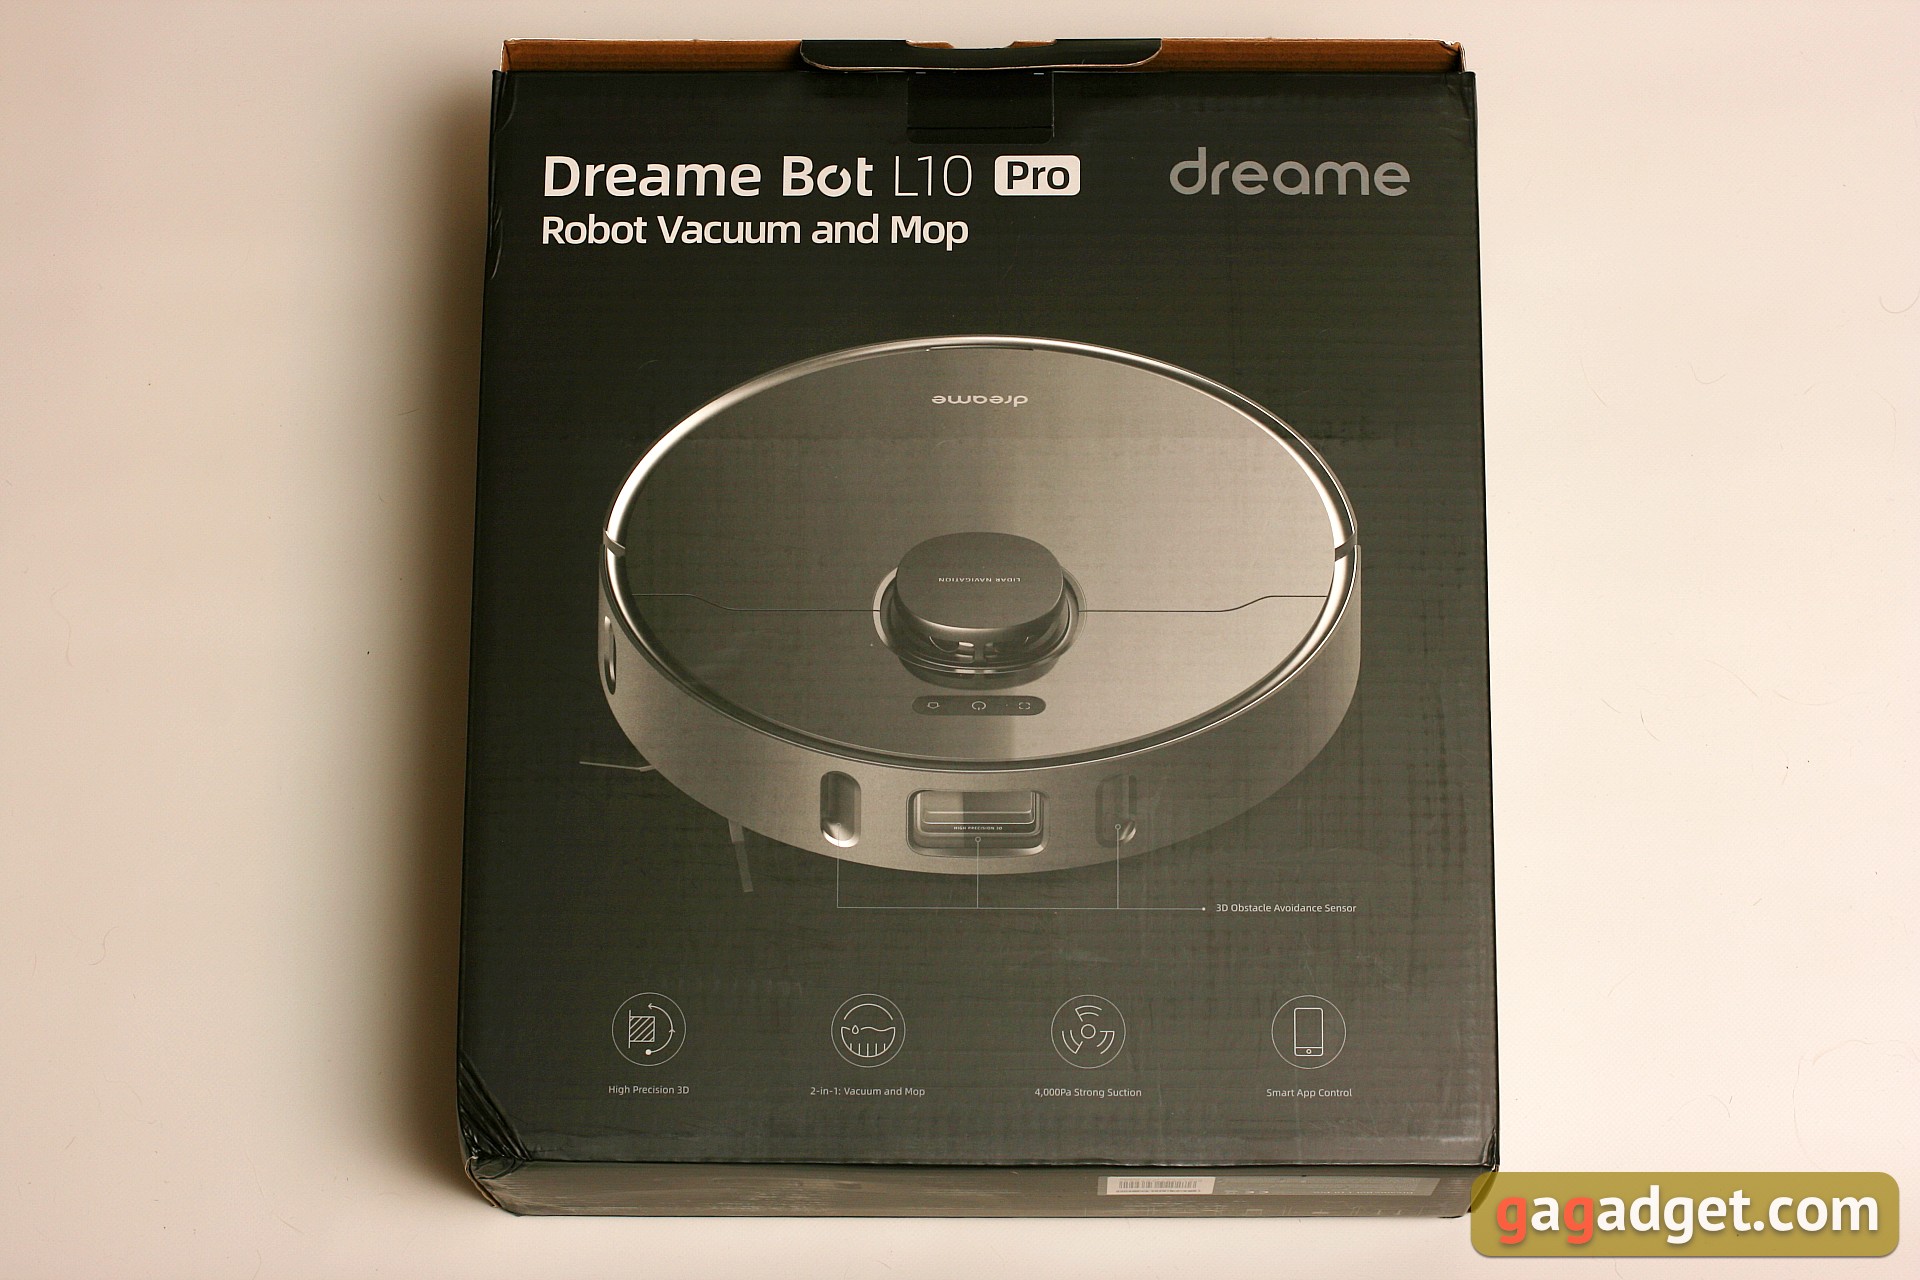 Dreame Bot L10 Pro Review: a Versatile Robot Vacuum Cleaner for Smart Home-2